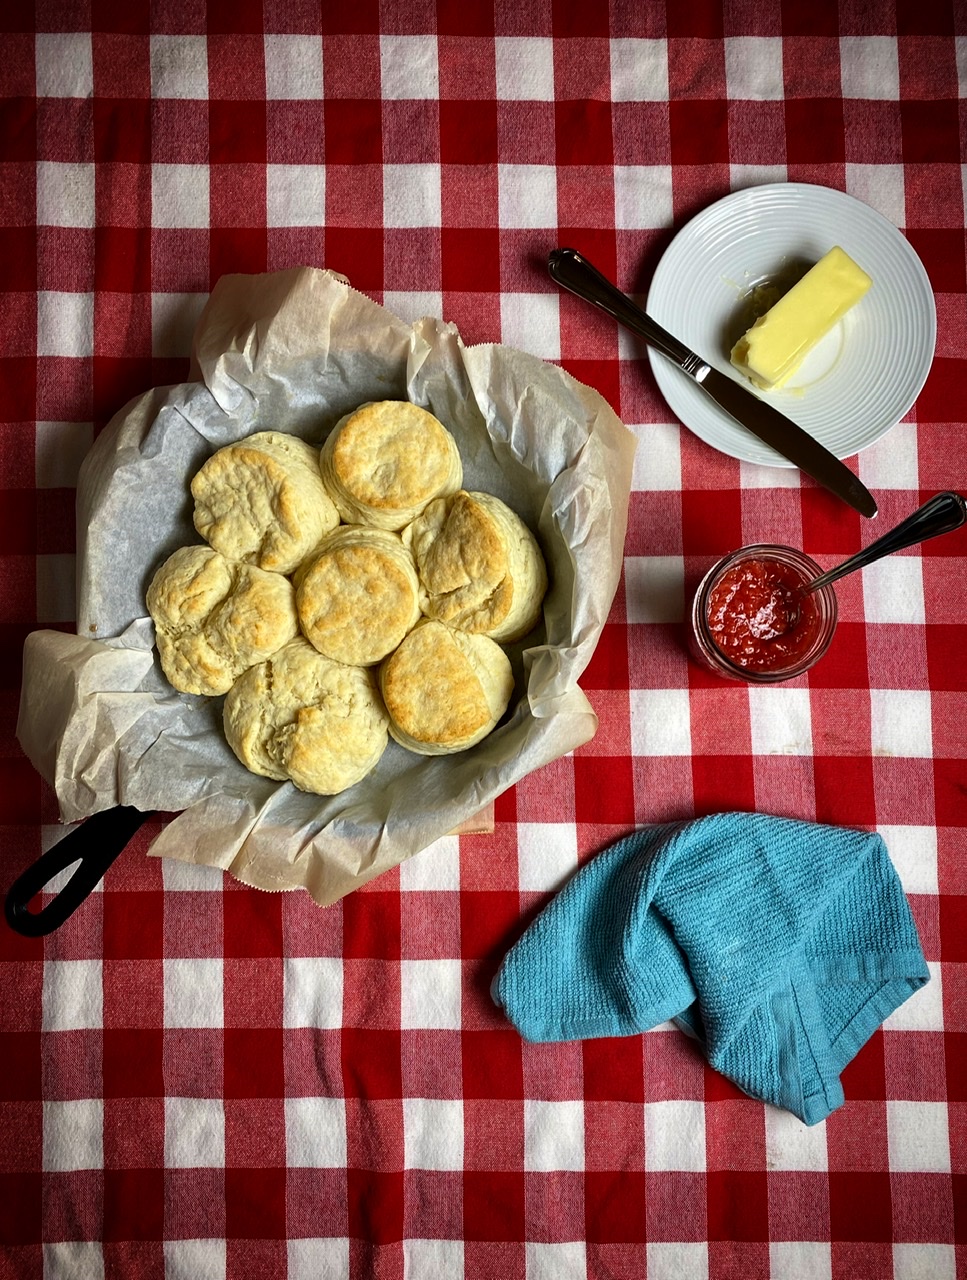 SMOKY, FLAKY CAST IRON BISCUITS